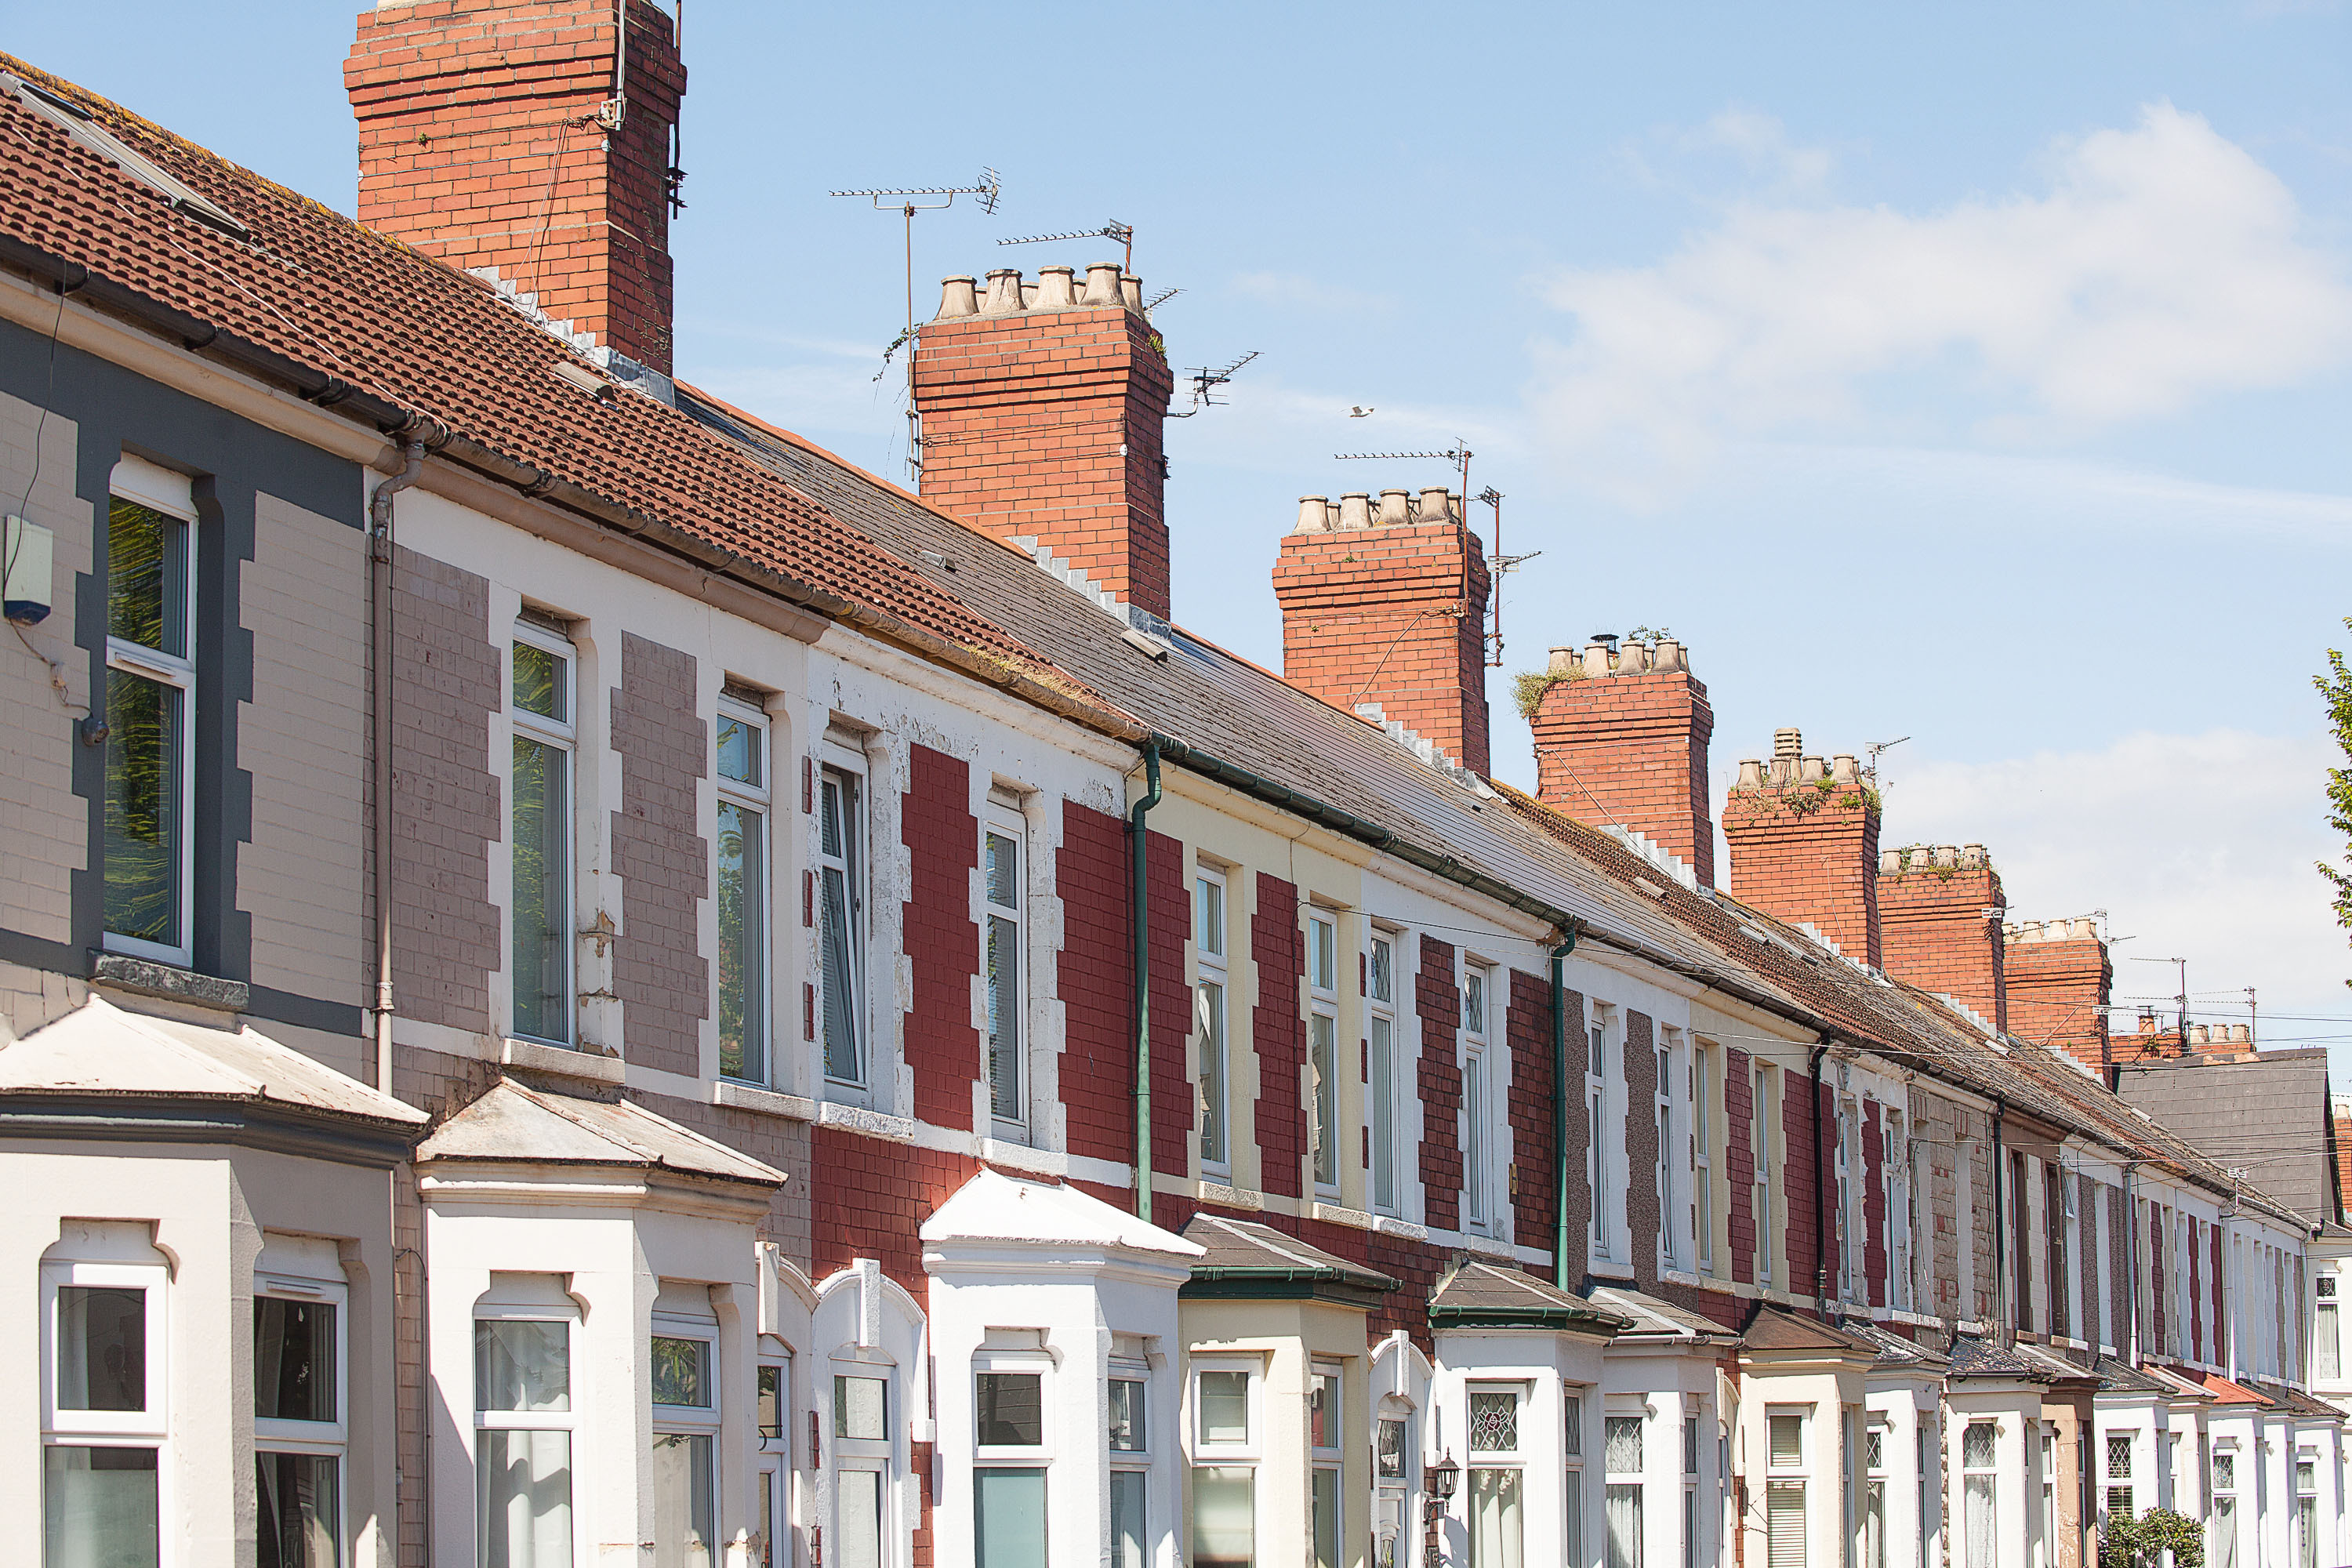 Rows of terrace houses in the UK city of Cardiff